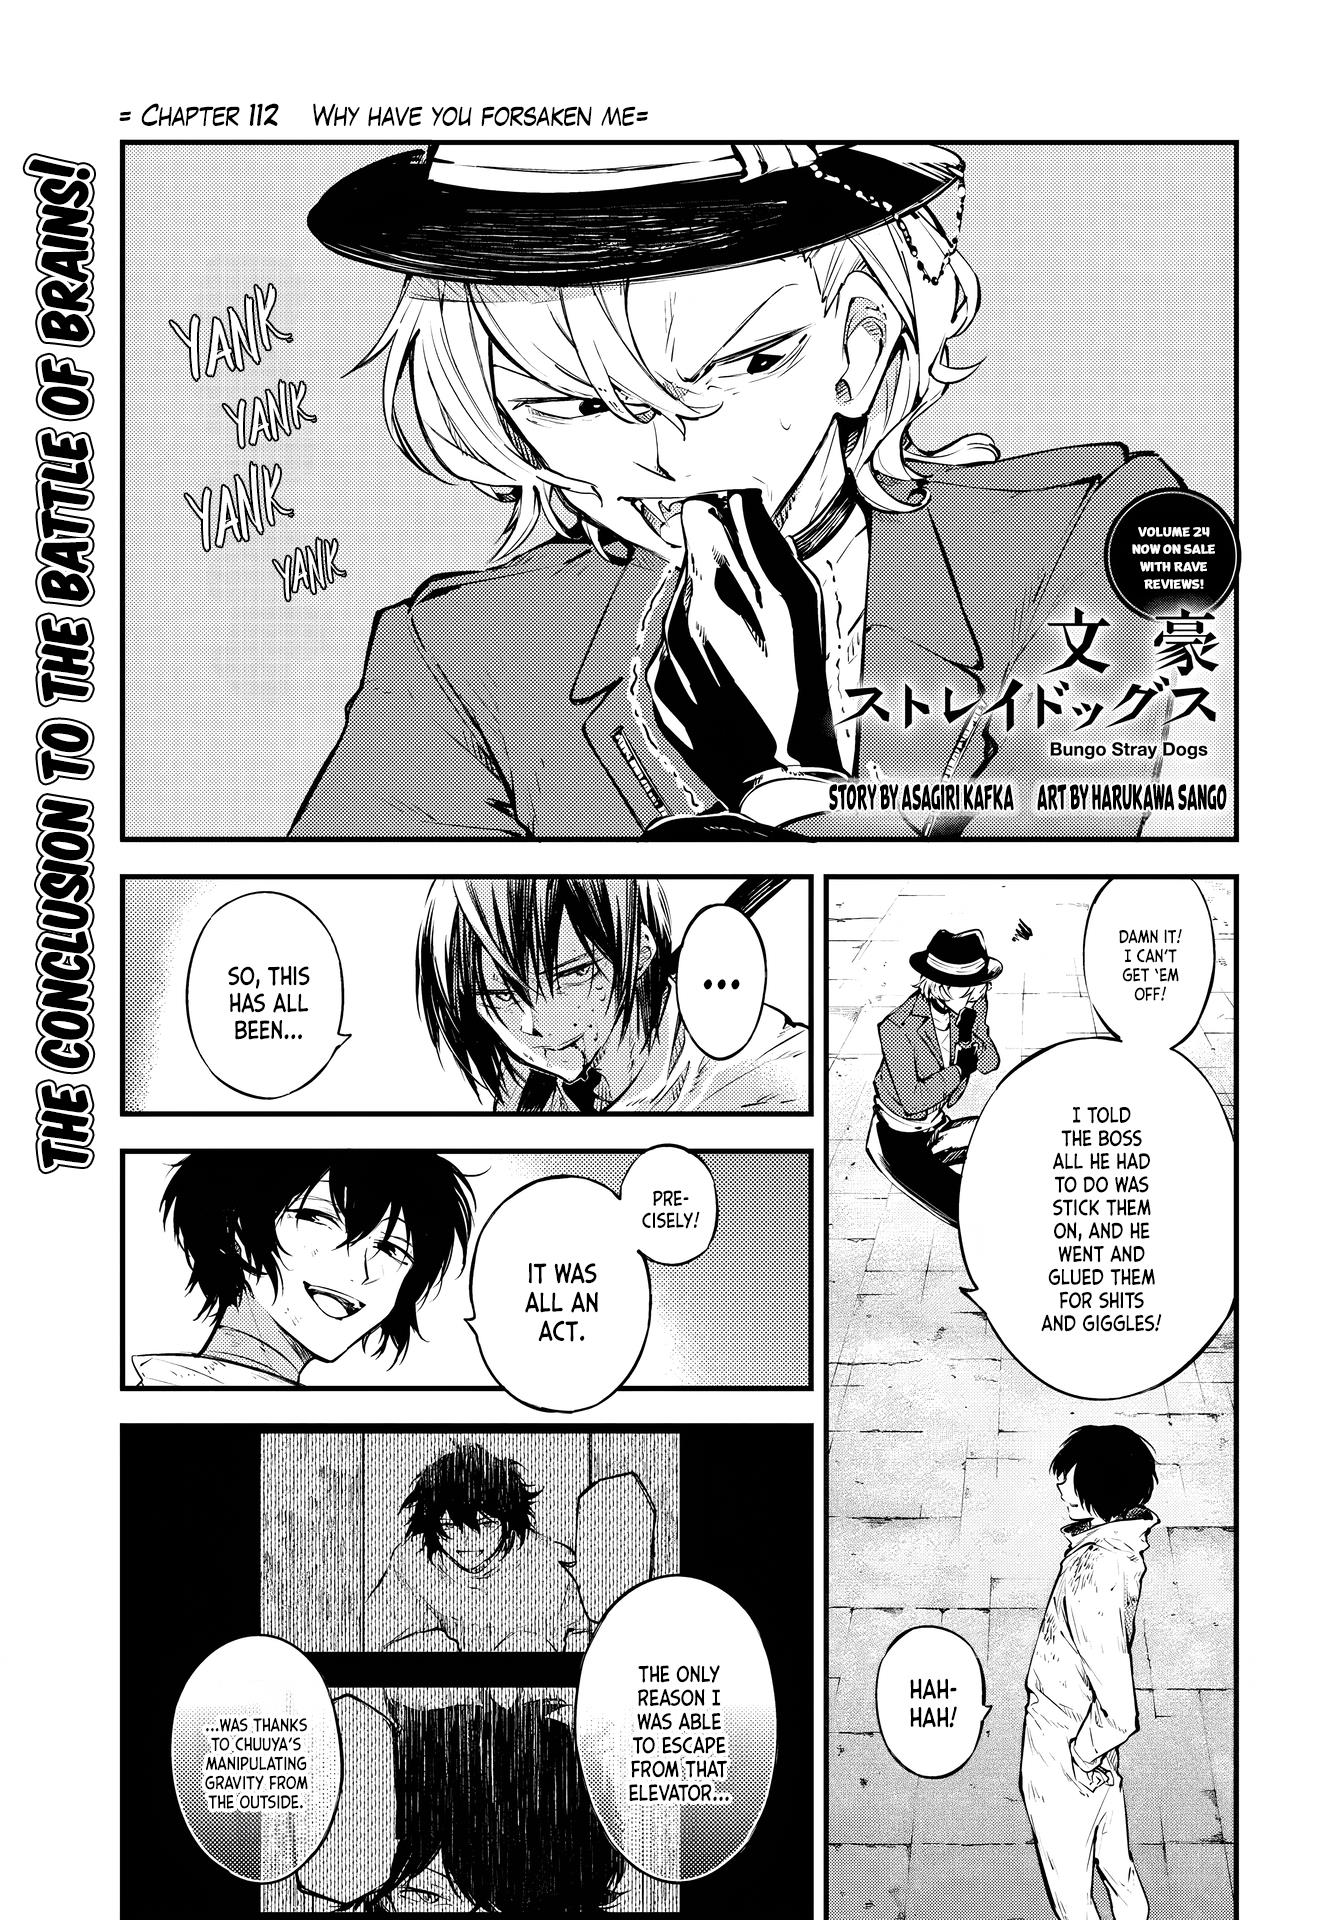 Bungou Stray Dogs Chapter 112: Why Have You Forsaken Me - Picture 2